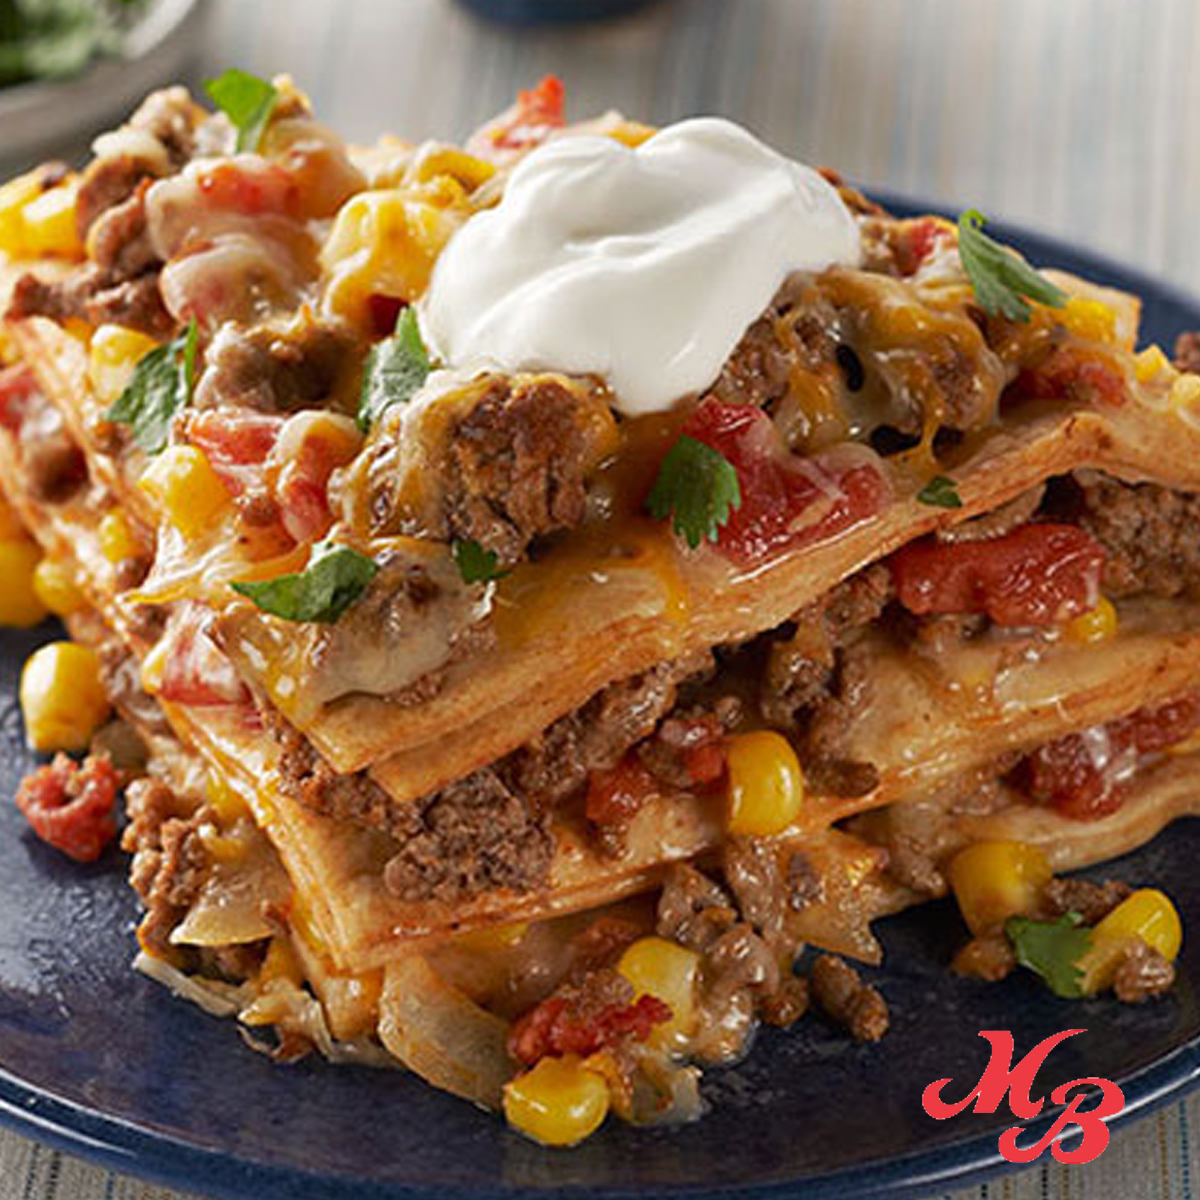 Taco Pie Make This Amazing Taco Pie In 3 Easy Steps Captivate Your Plate Cook Over Low Heat